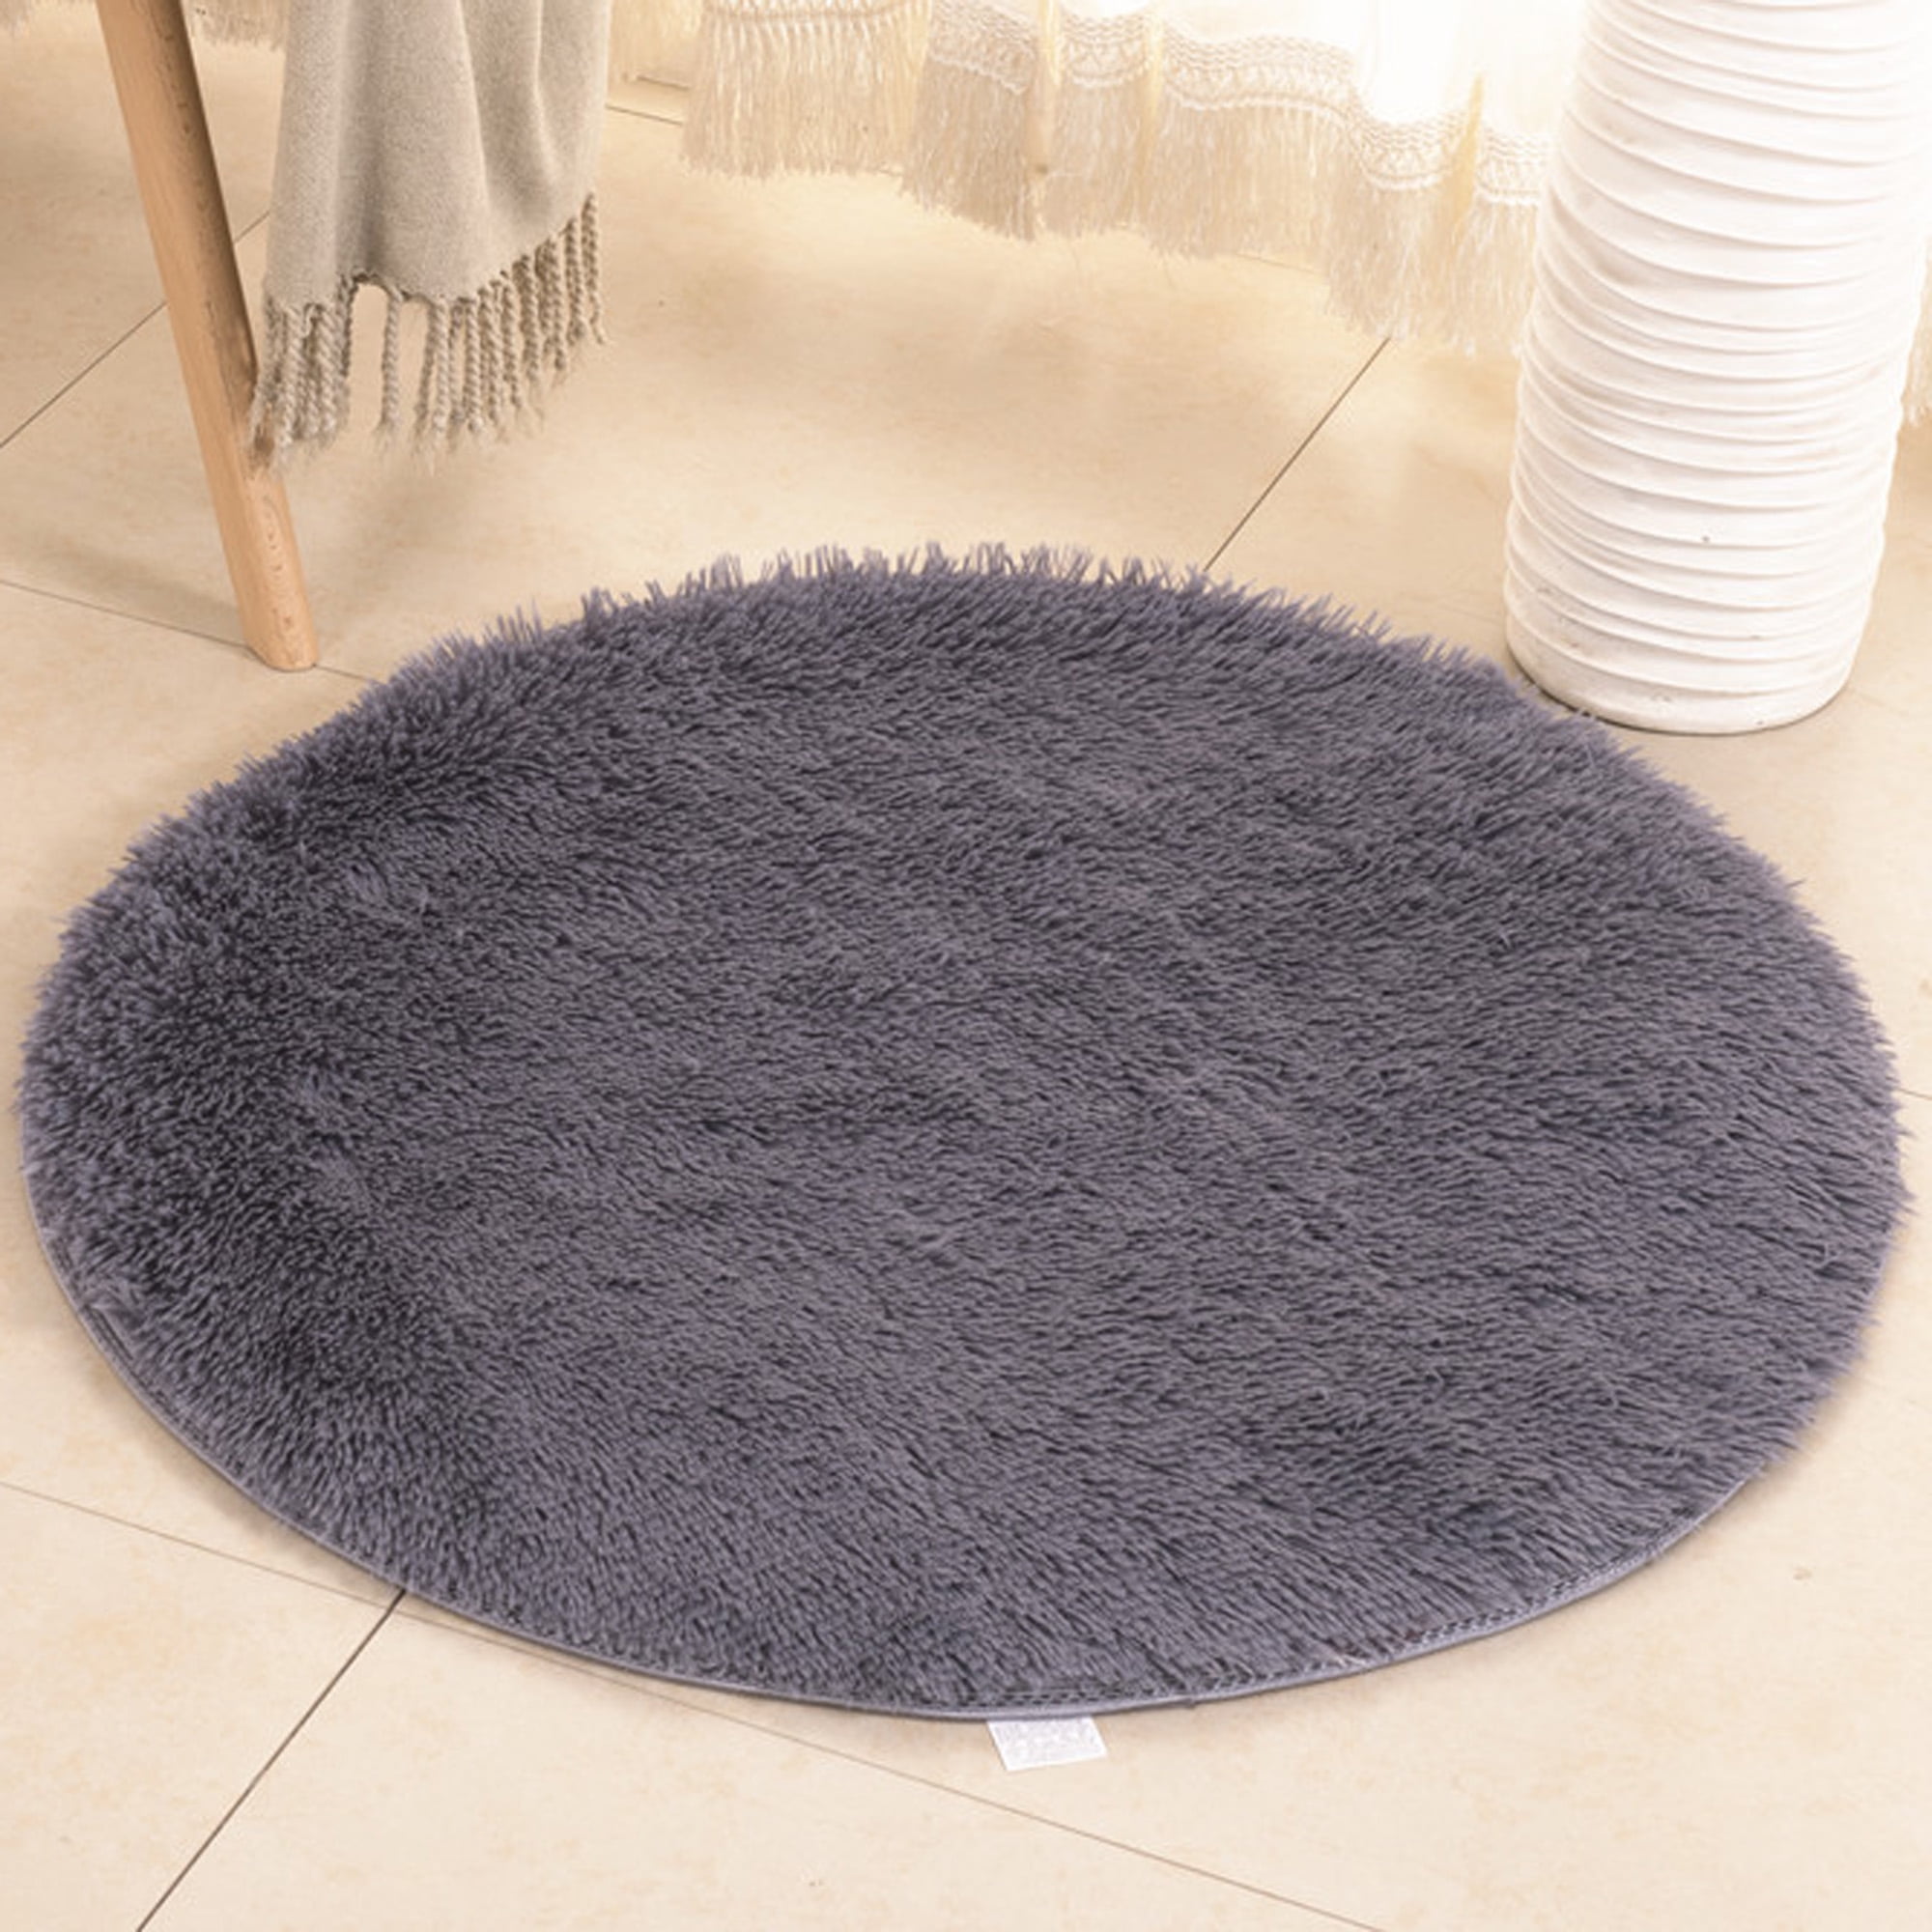 Dodoing Super Soft Round Area Rugs For, Circle Area Rugs